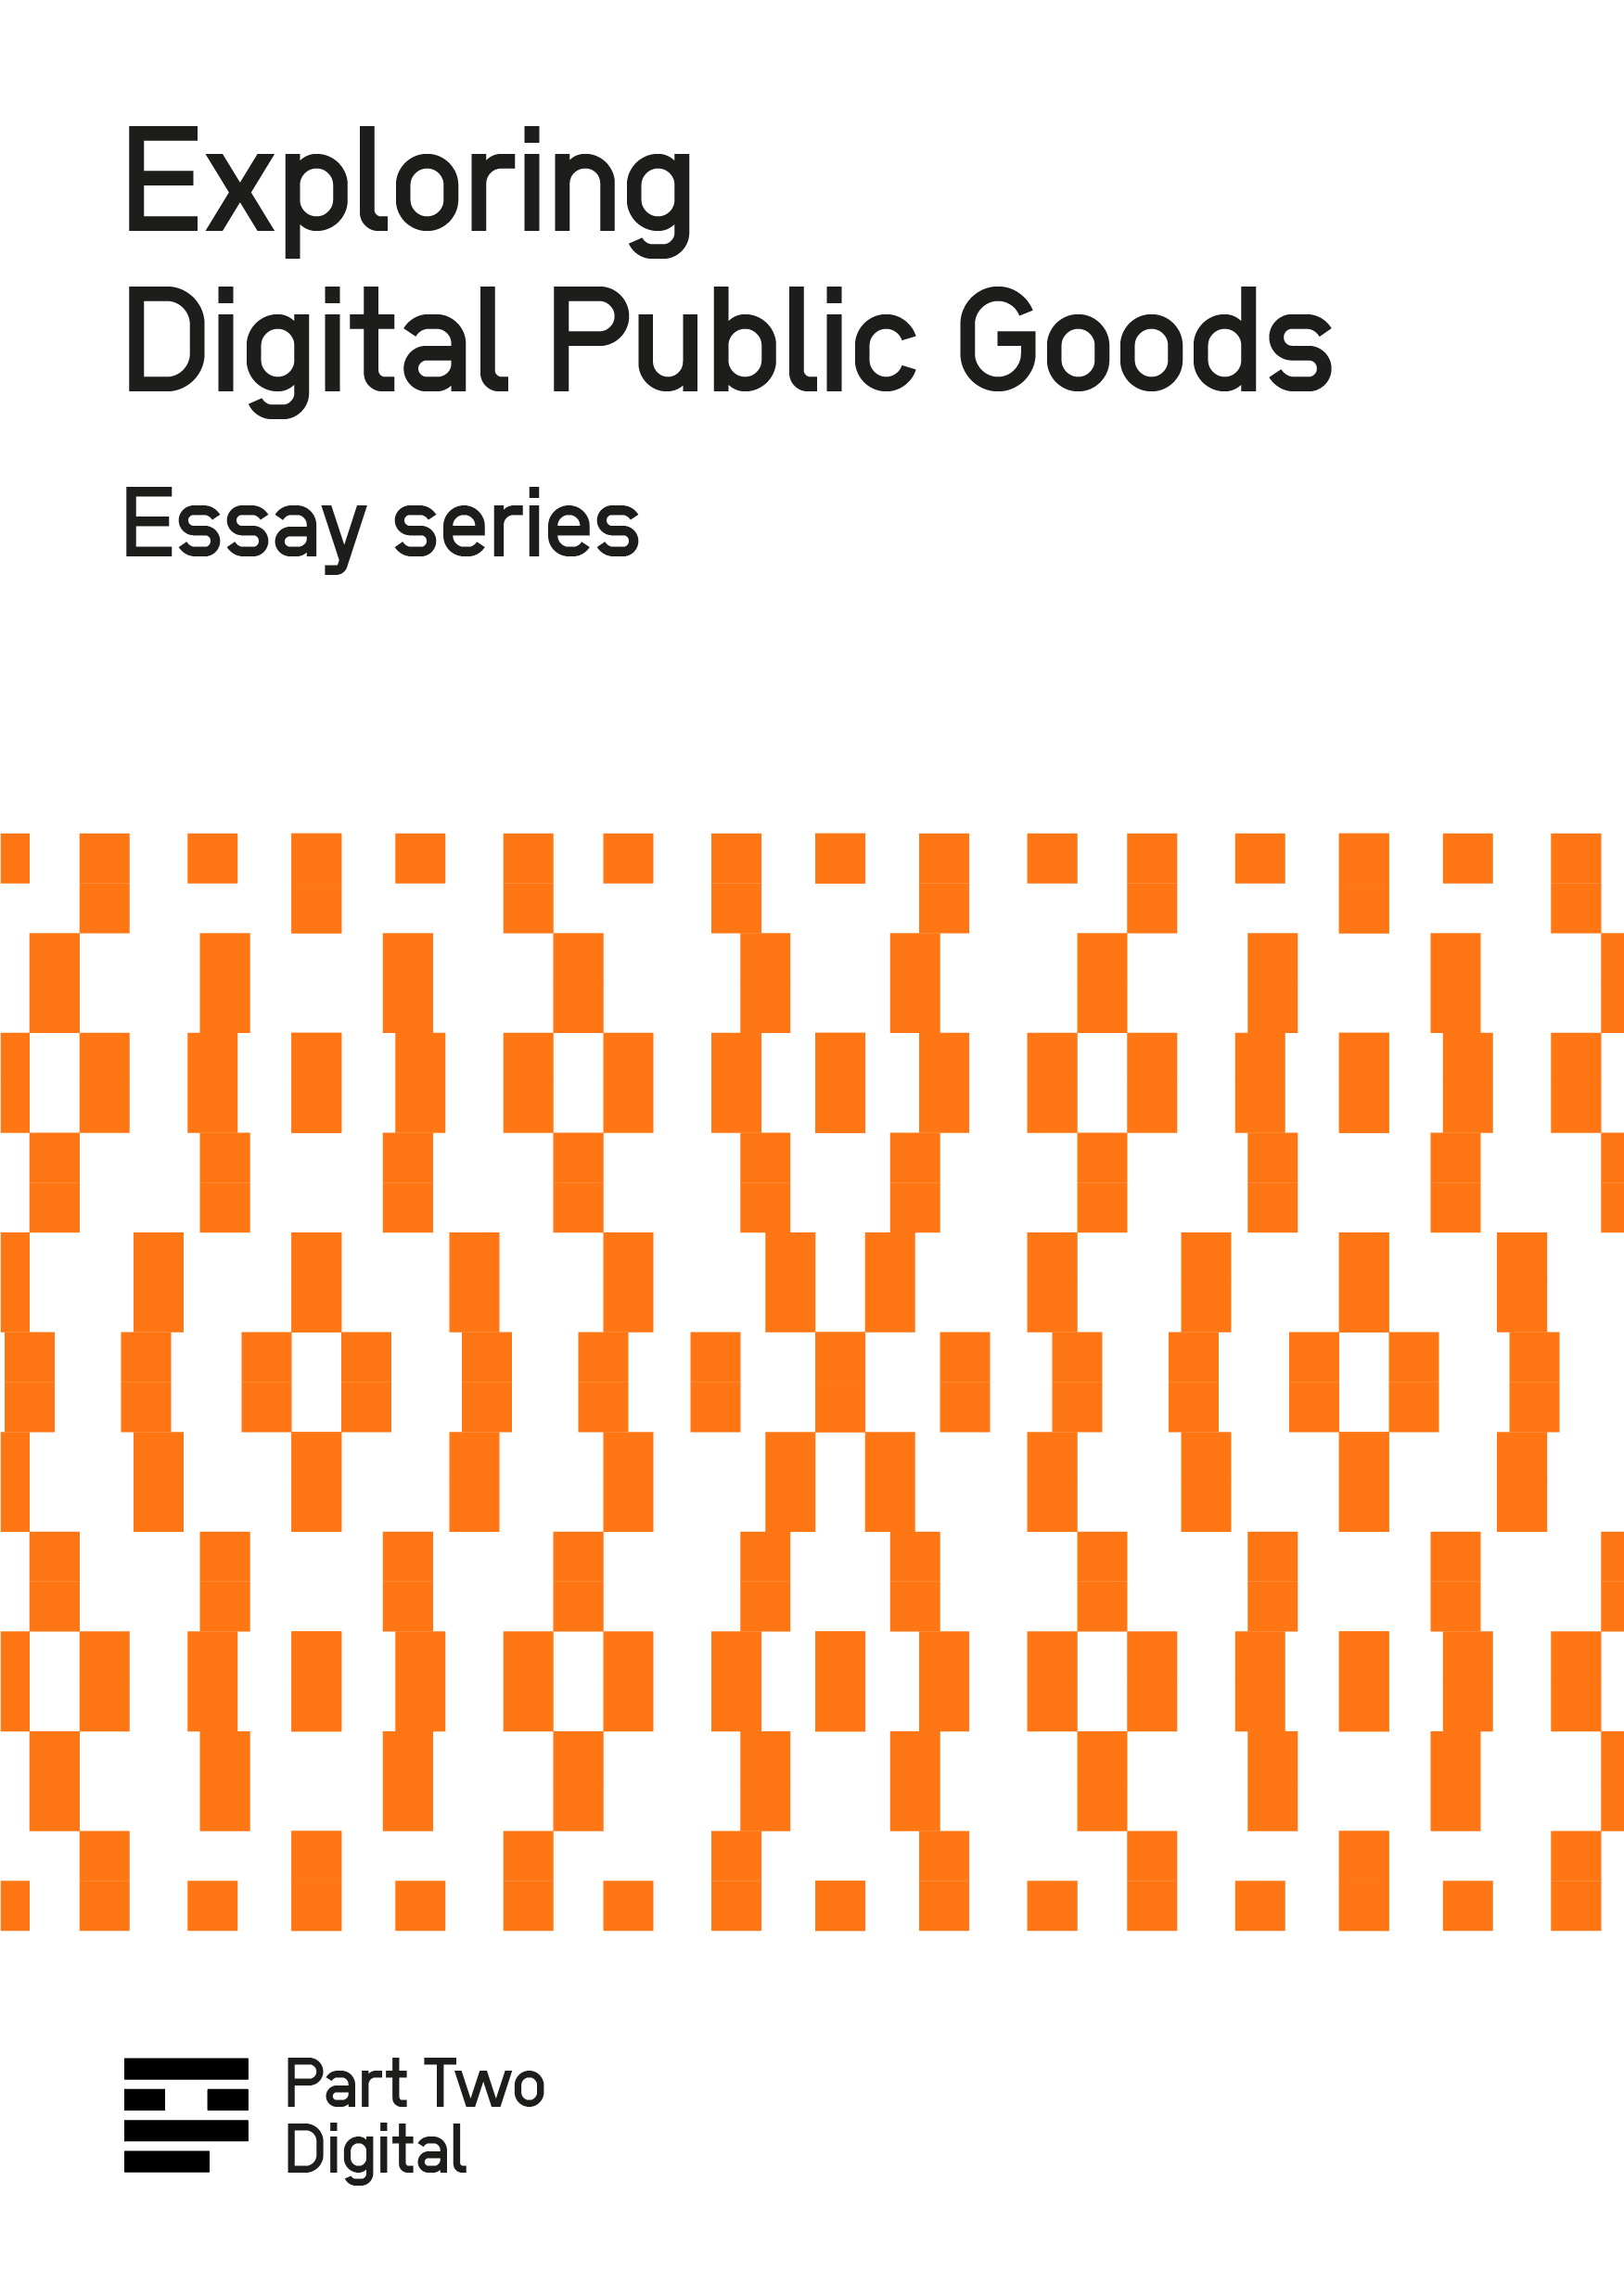 Cover of publication with orange pixel pattern of overlapping circles